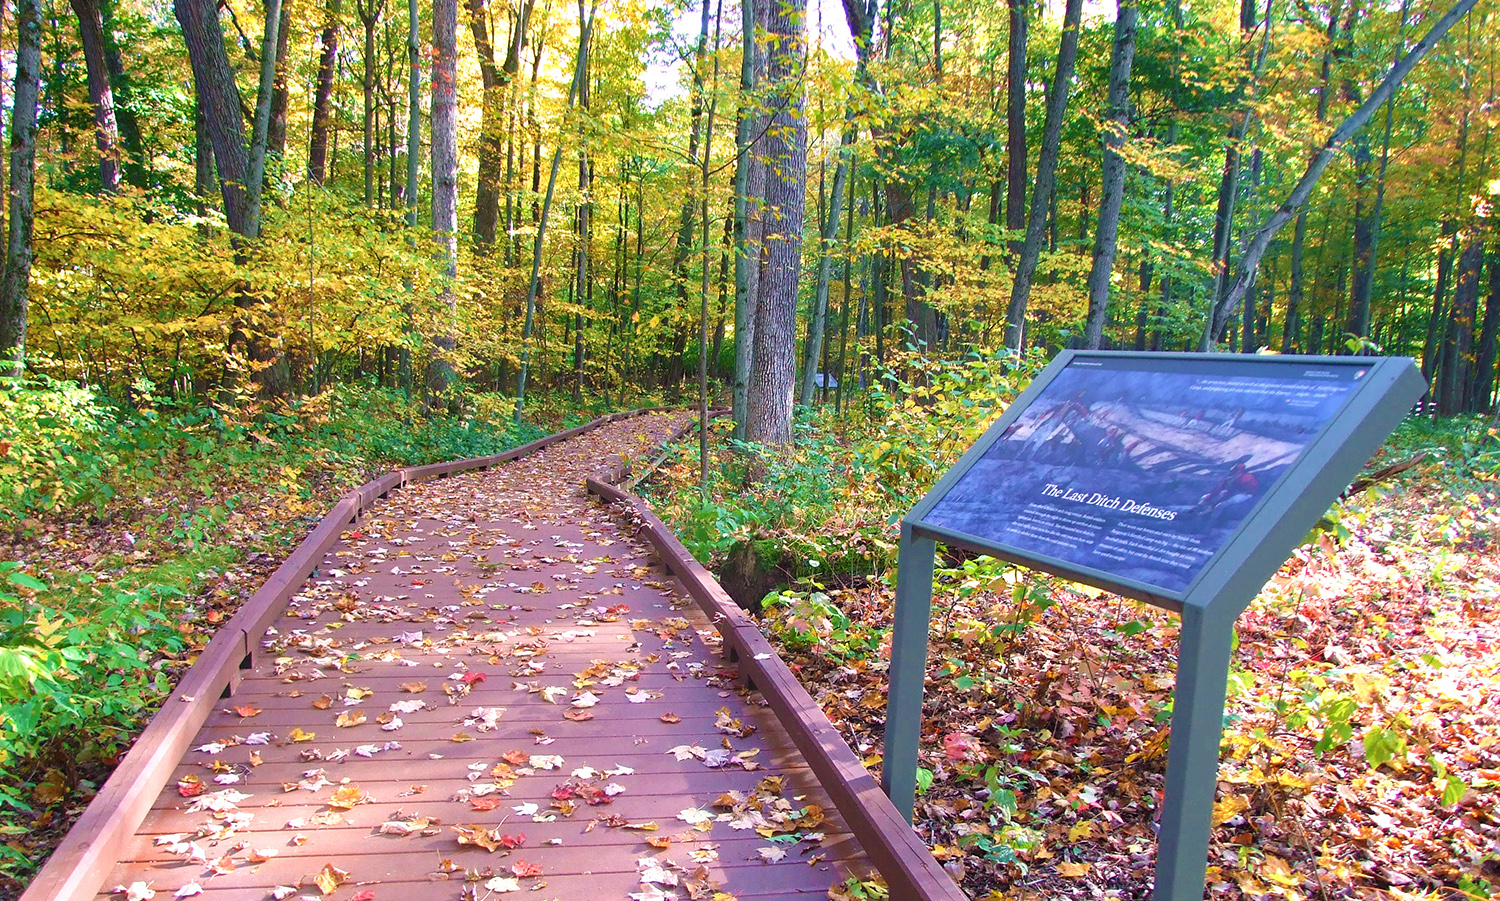 An informational sign sits beside a wooden walkway winding amid early autumn trees.